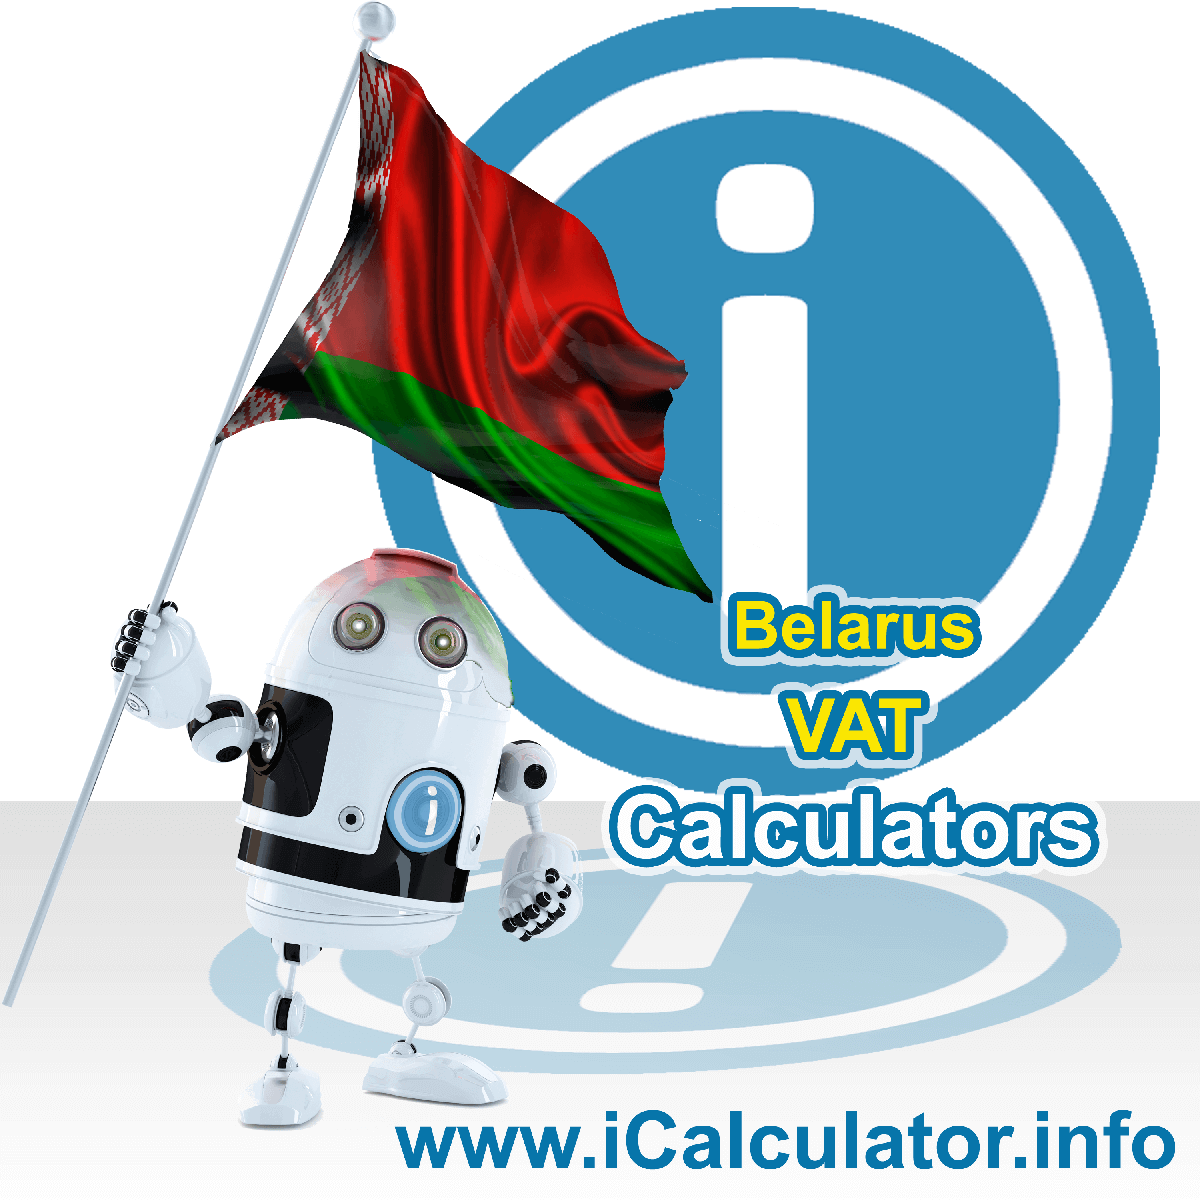 Belarus VAT Calculator. This image shows the Belarus flag and information relating to the VAT formula used for calculating Value Added Tax in Belarus using the Belarus VAT Calculator in 2023